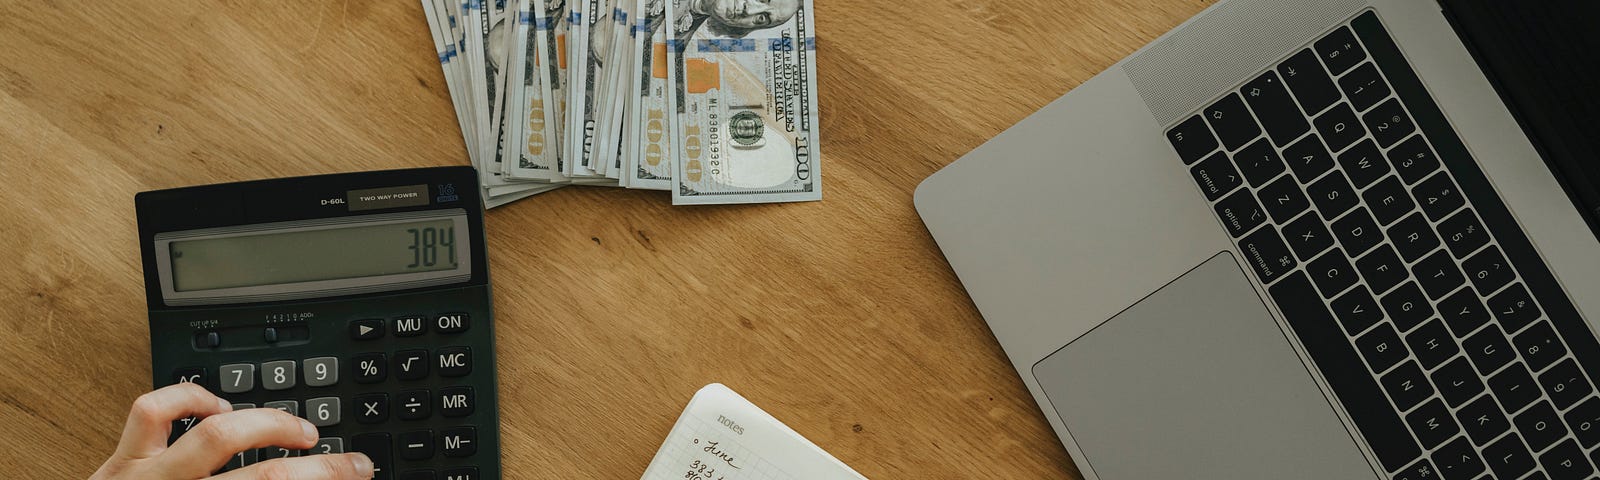 Here we have a picture of a person calculating all of the money that they made writing, just like I did for this article. There are disembodied hands over a calculator and notepad. A stack of money and laptop is nearby on a wooden table.